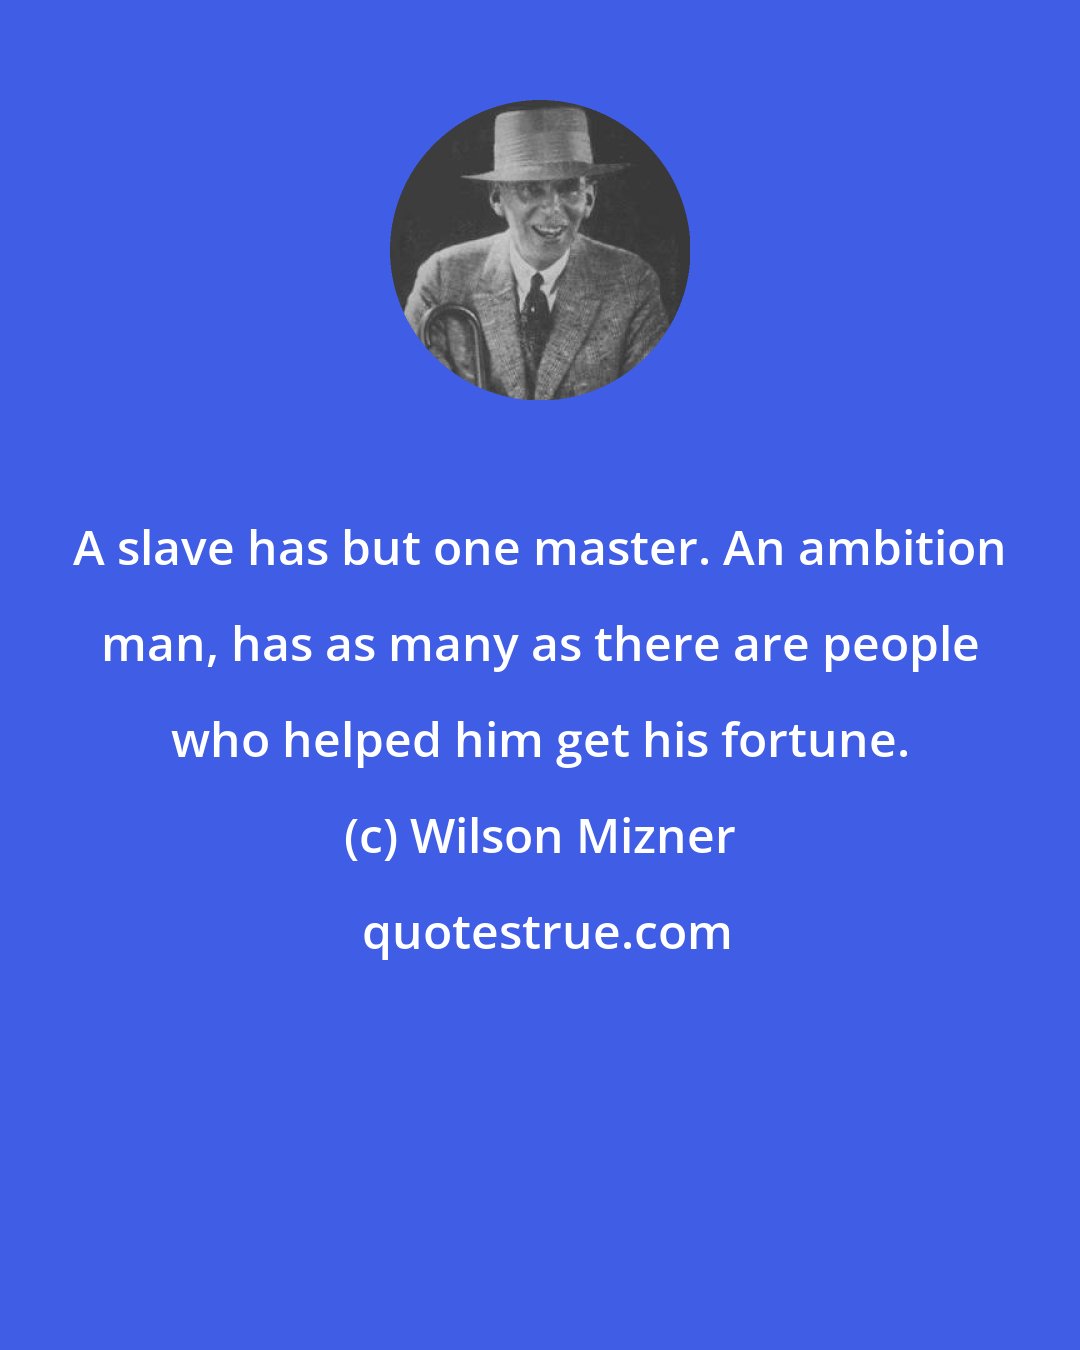 Wilson Mizner: A slave has but one master. An ambition man, has as many as there are people who helped him get his fortune.